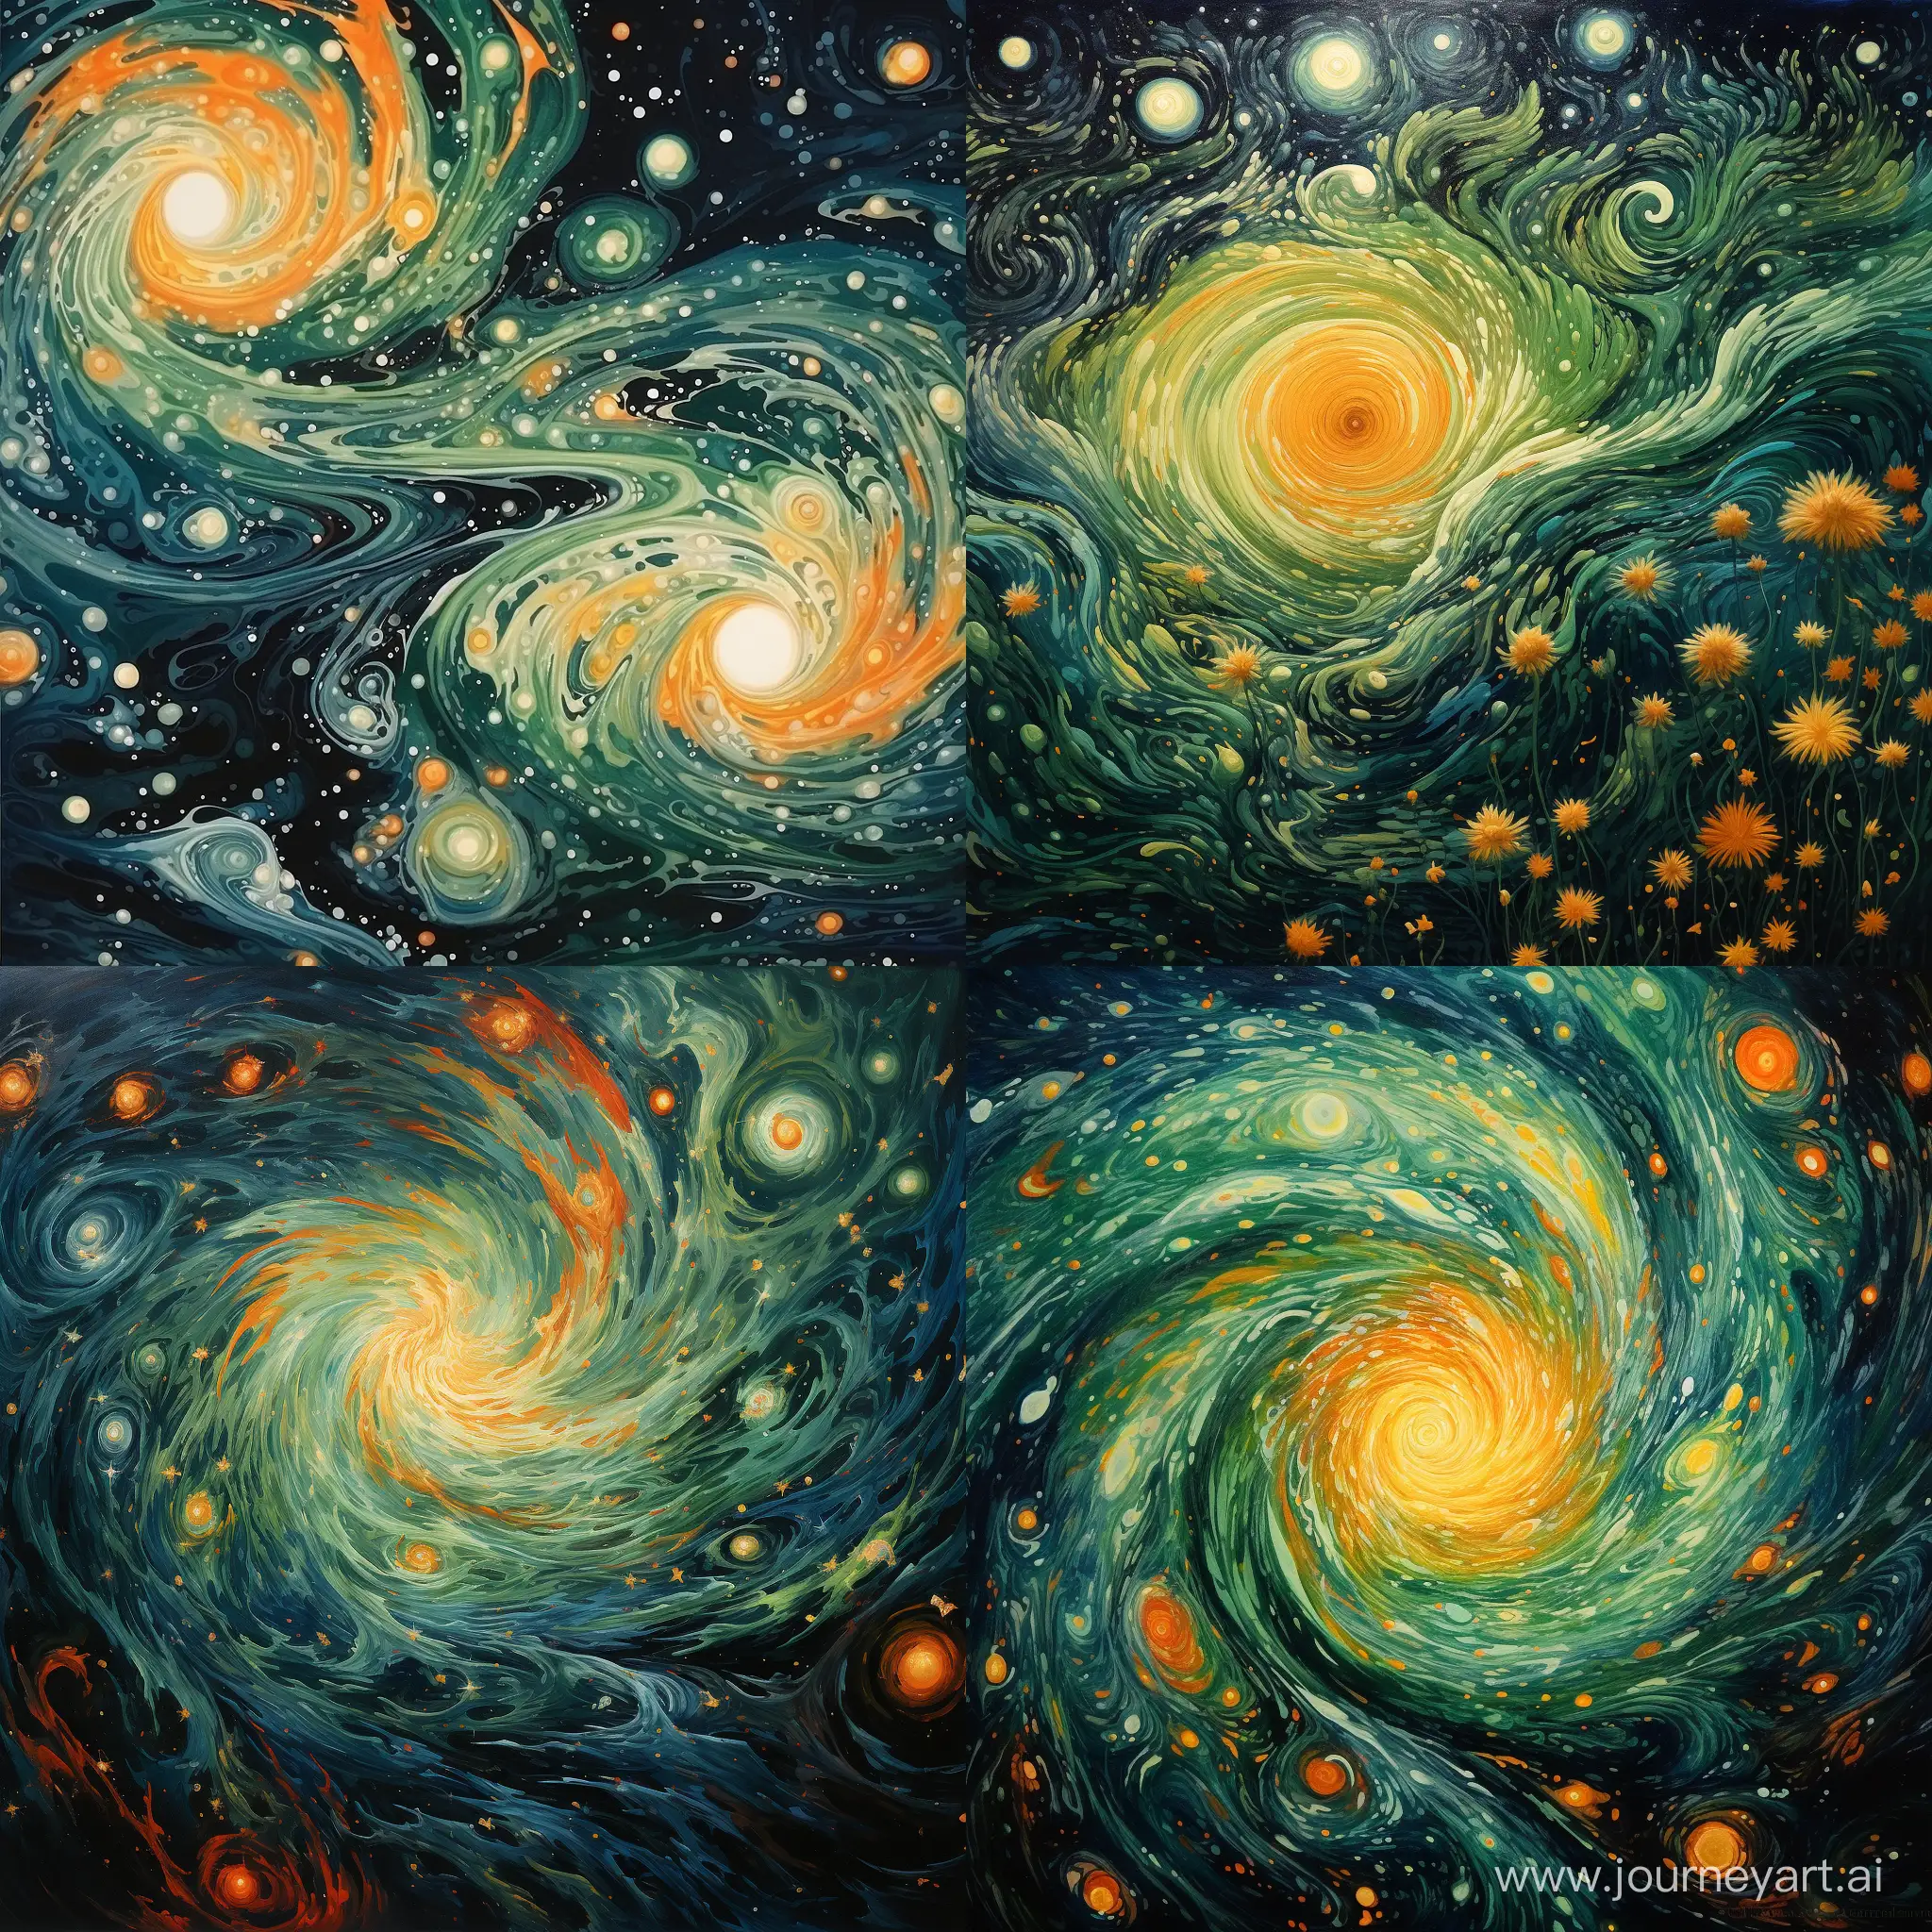 Astral-Whirls-in-Blumensee-Swirling-Green-and-Orange-Galaxies